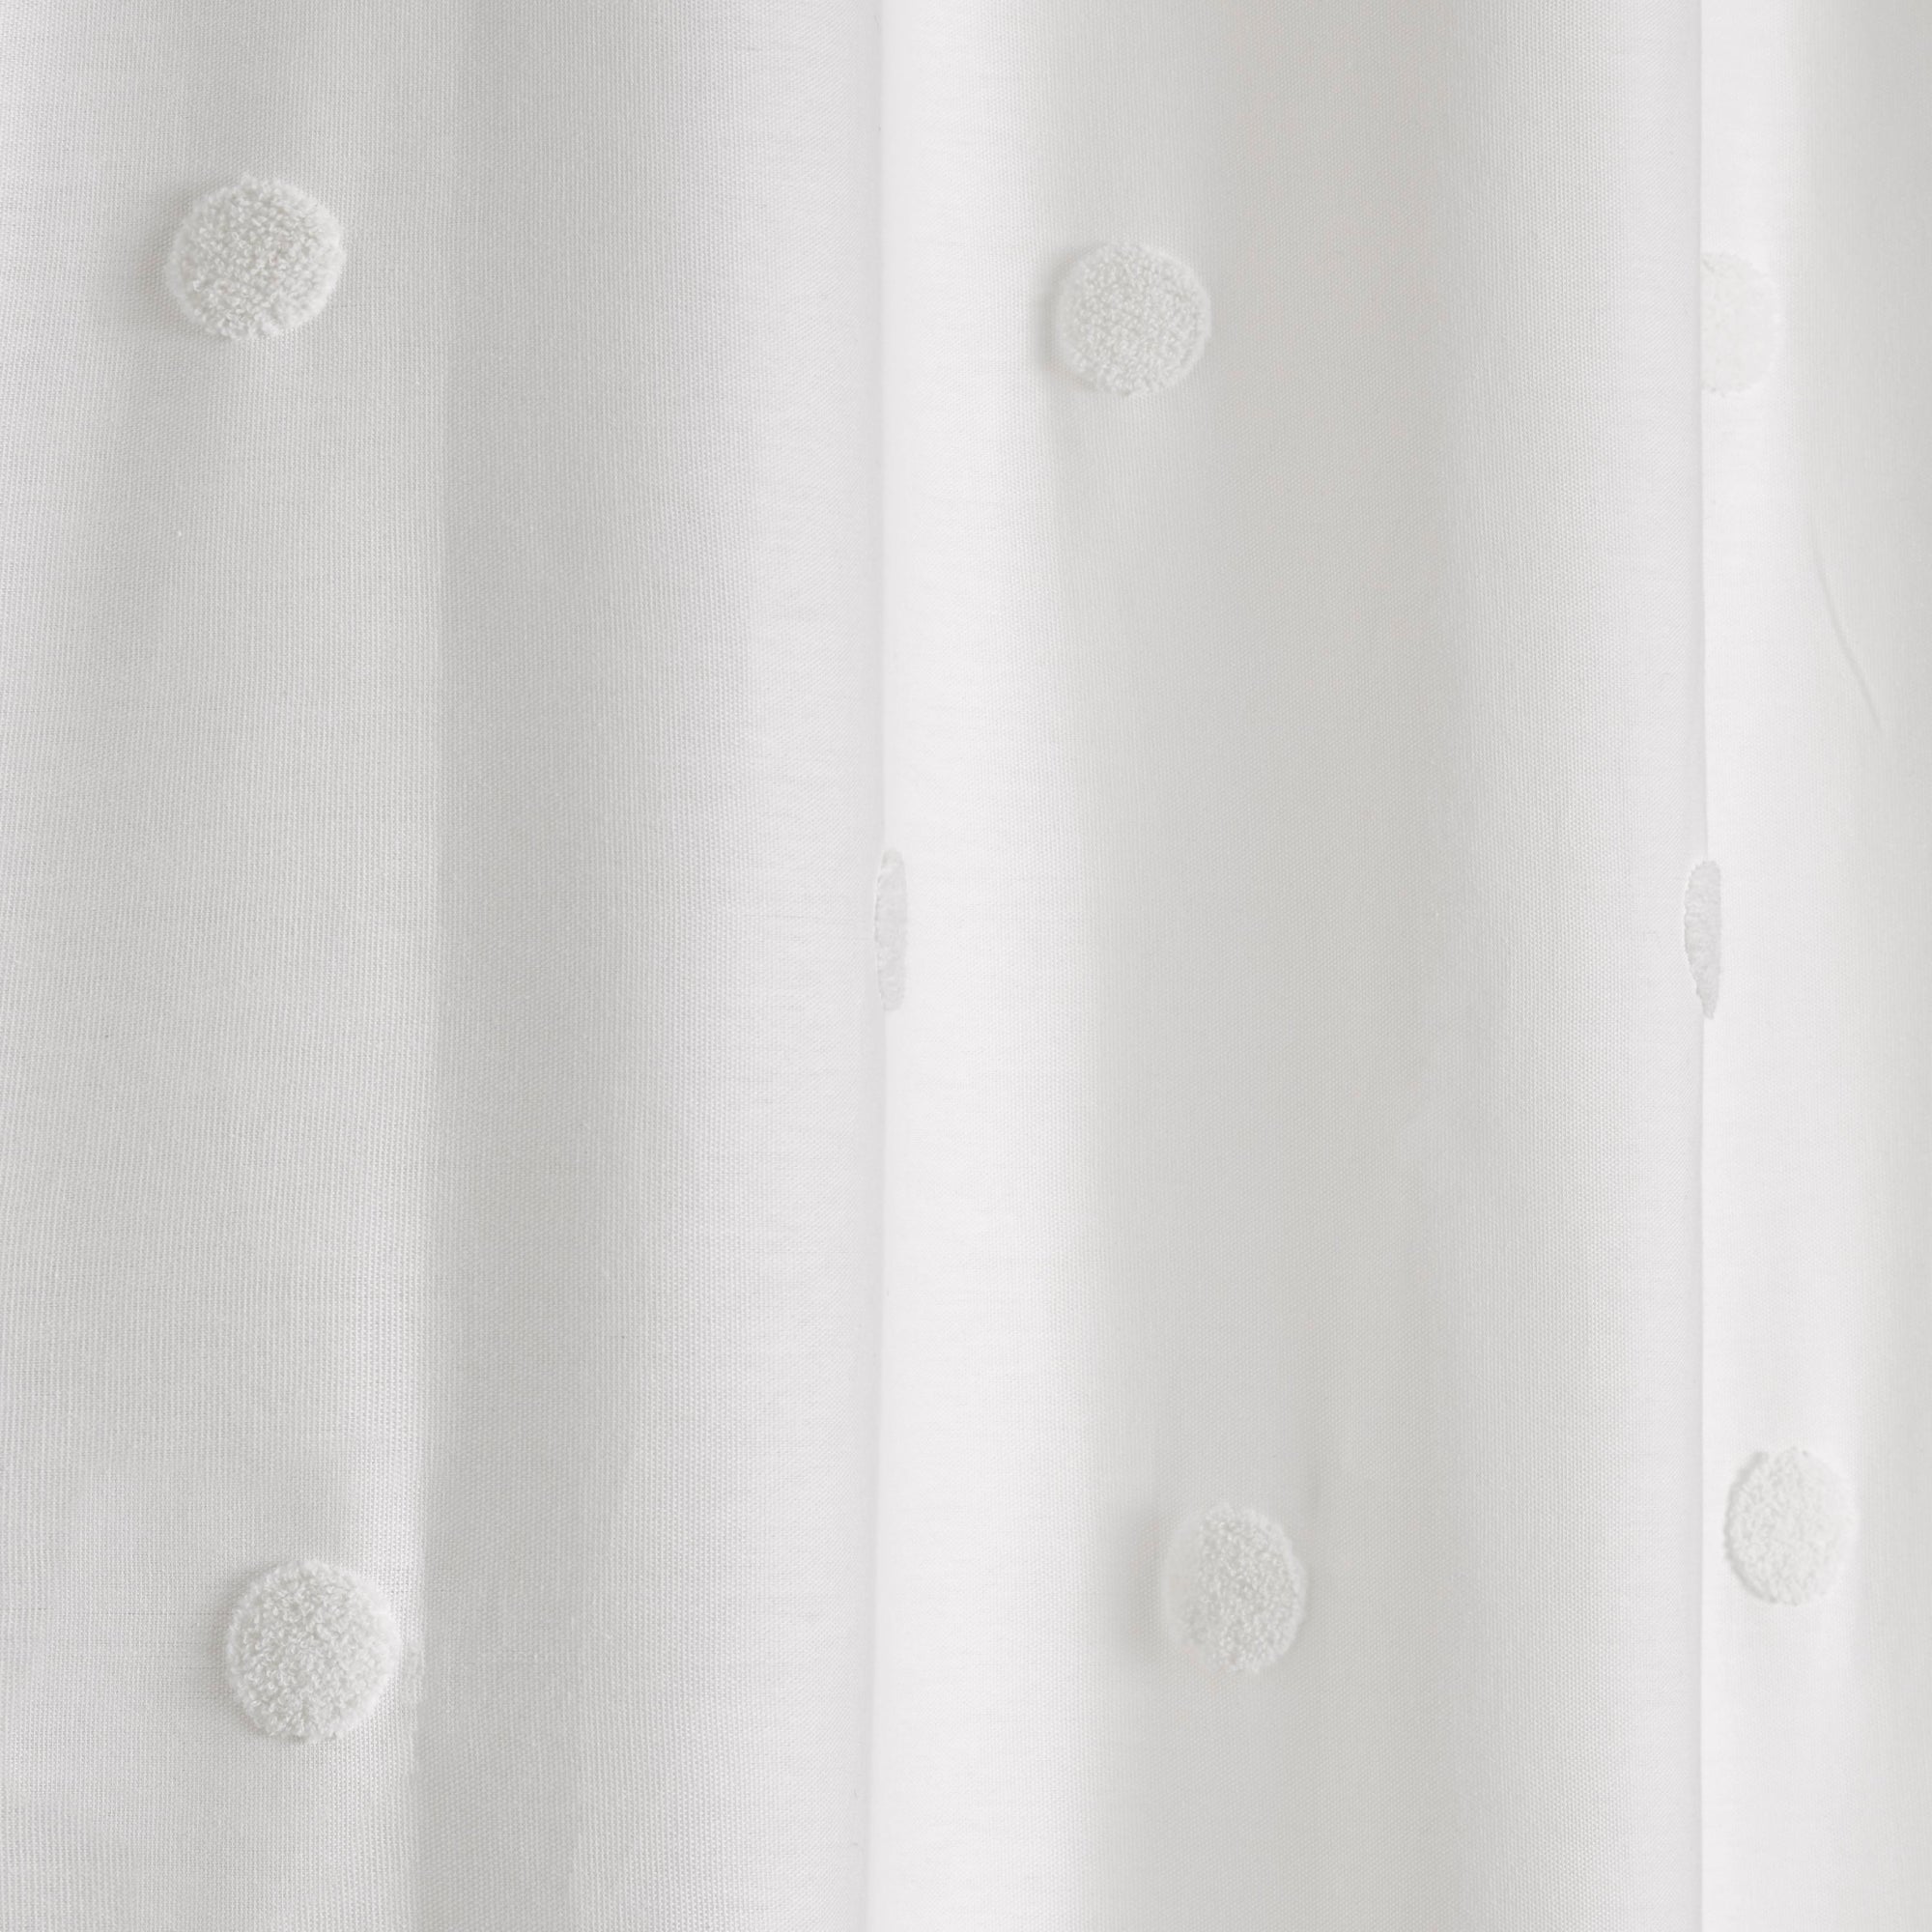 Pair of Eyelet Curtains Zara by Appletree Boutique in White